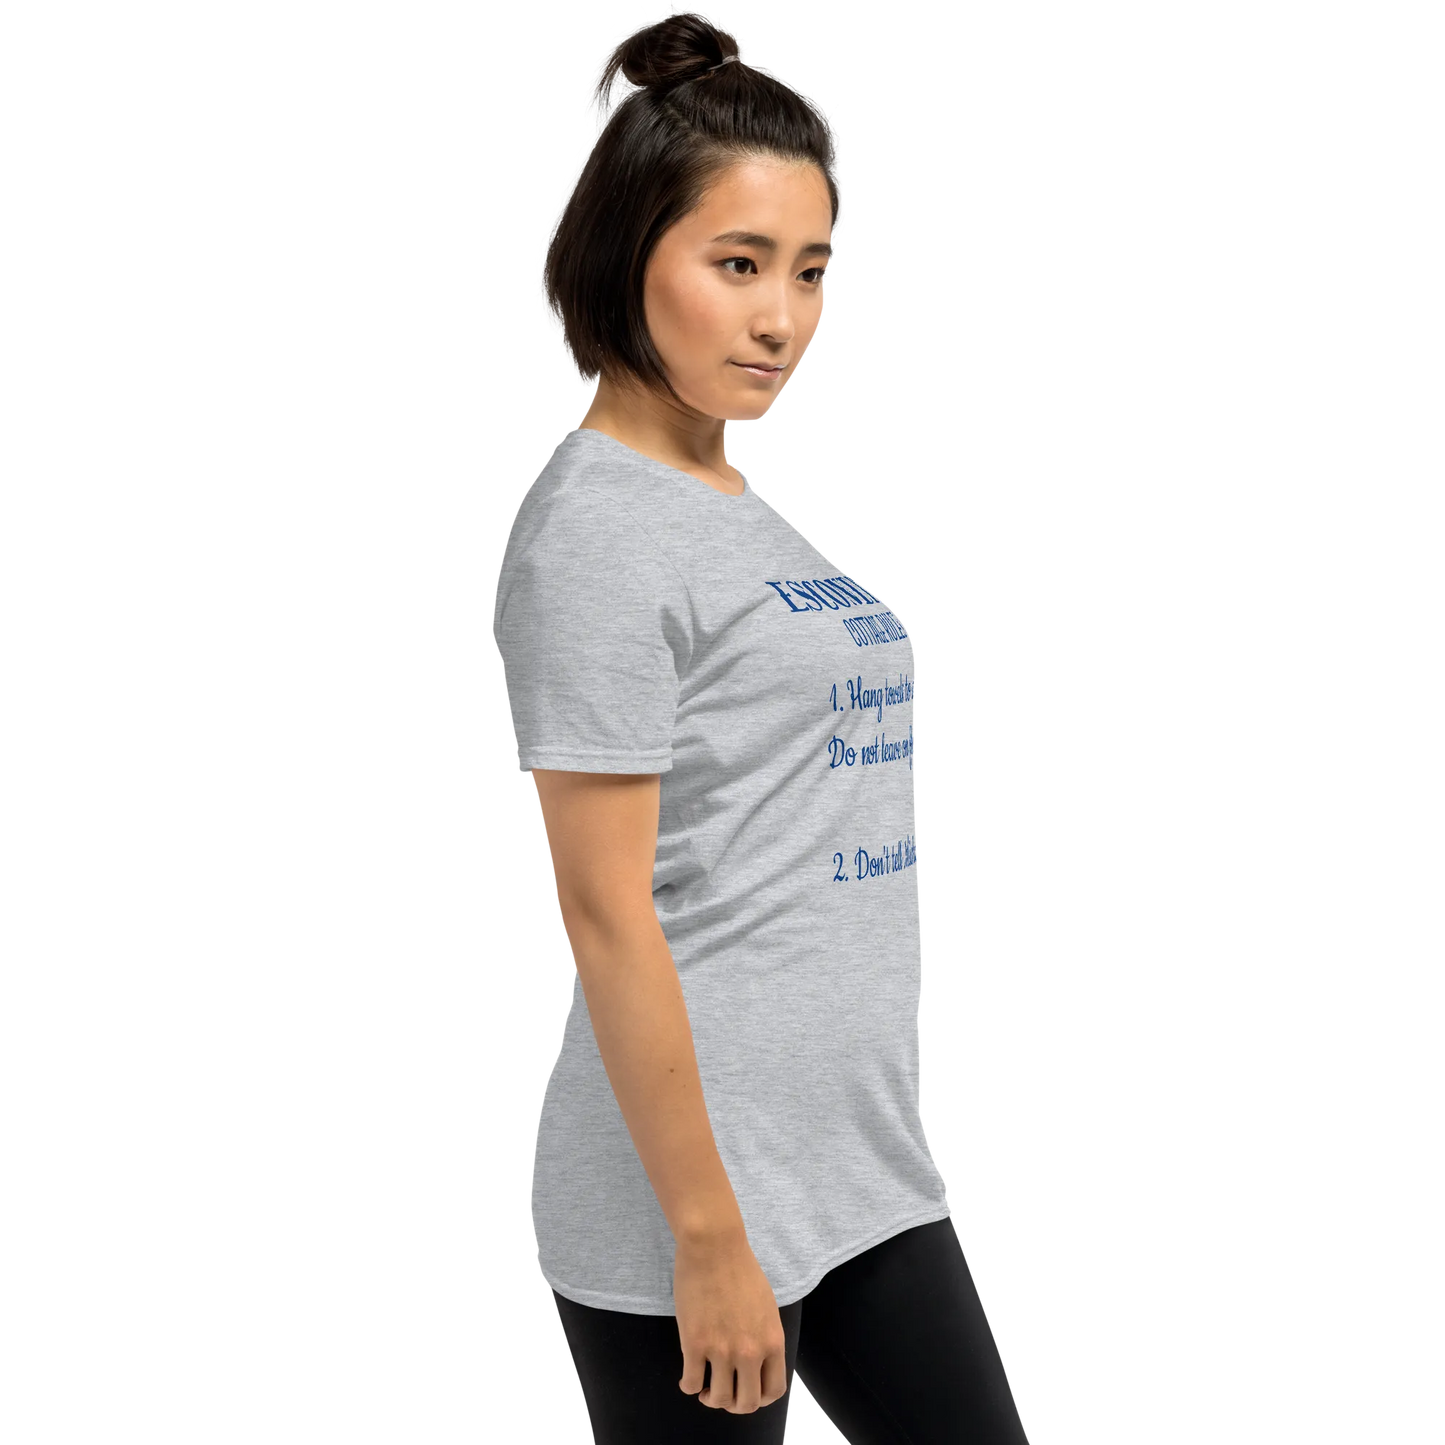 ESCONDITE Cottage Rules Tee in Sport Grey on woman side